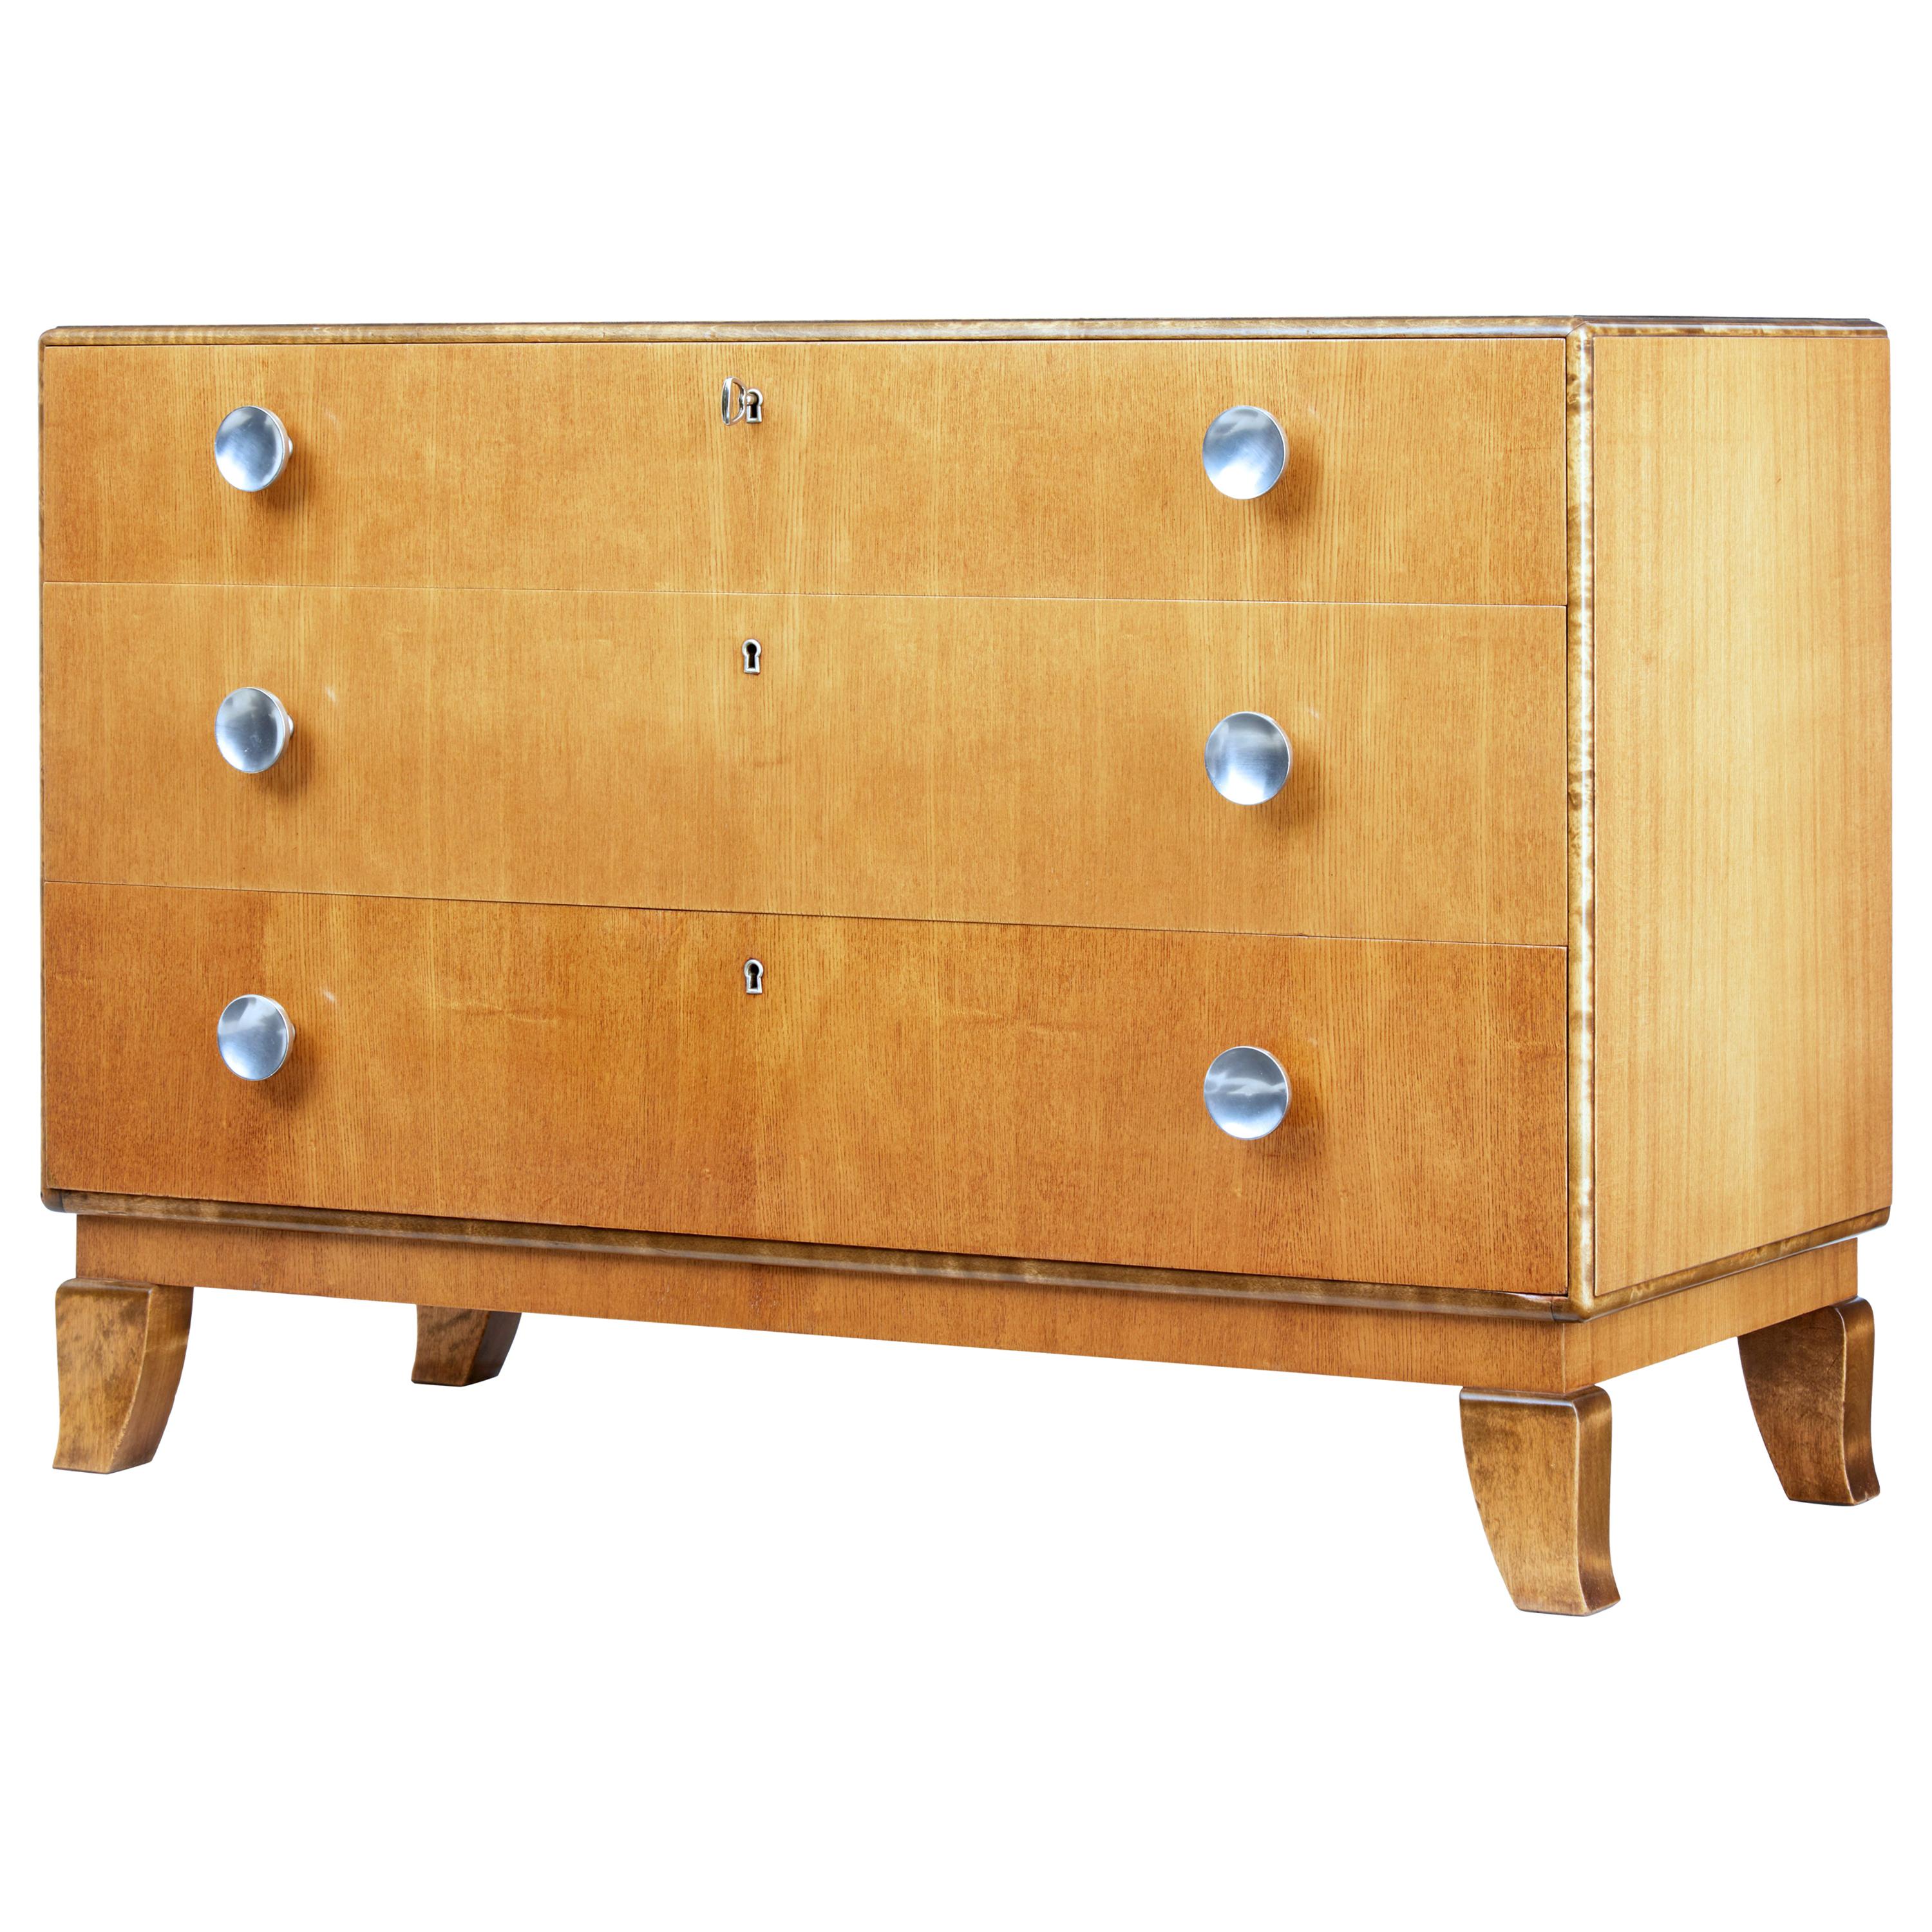 Mid-20th Century Scandinavian Elm and Birch Chest of Drawers